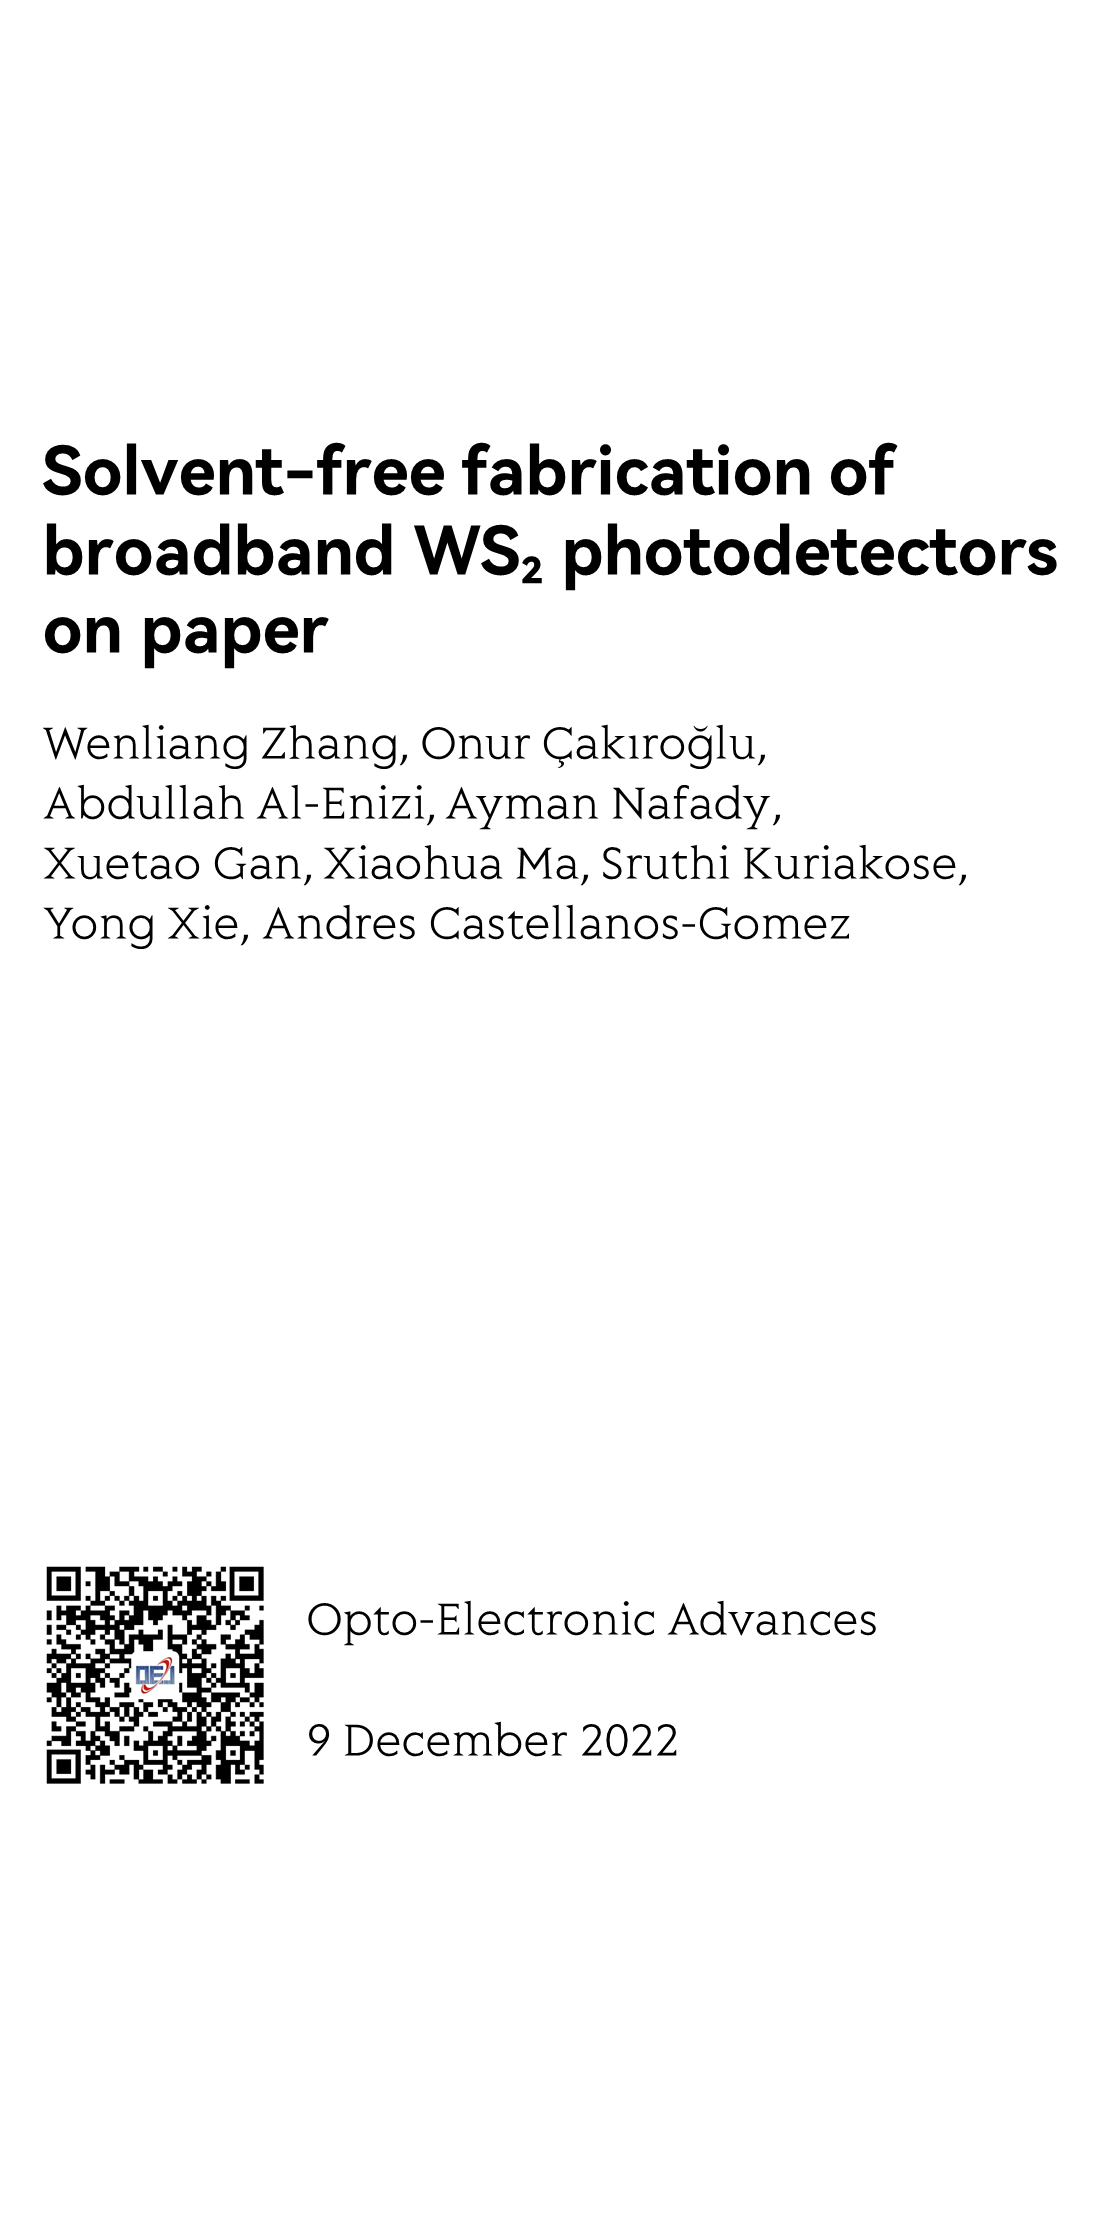 Solvent-free fabrication of broadband WS₂ photodetectors on paper_1